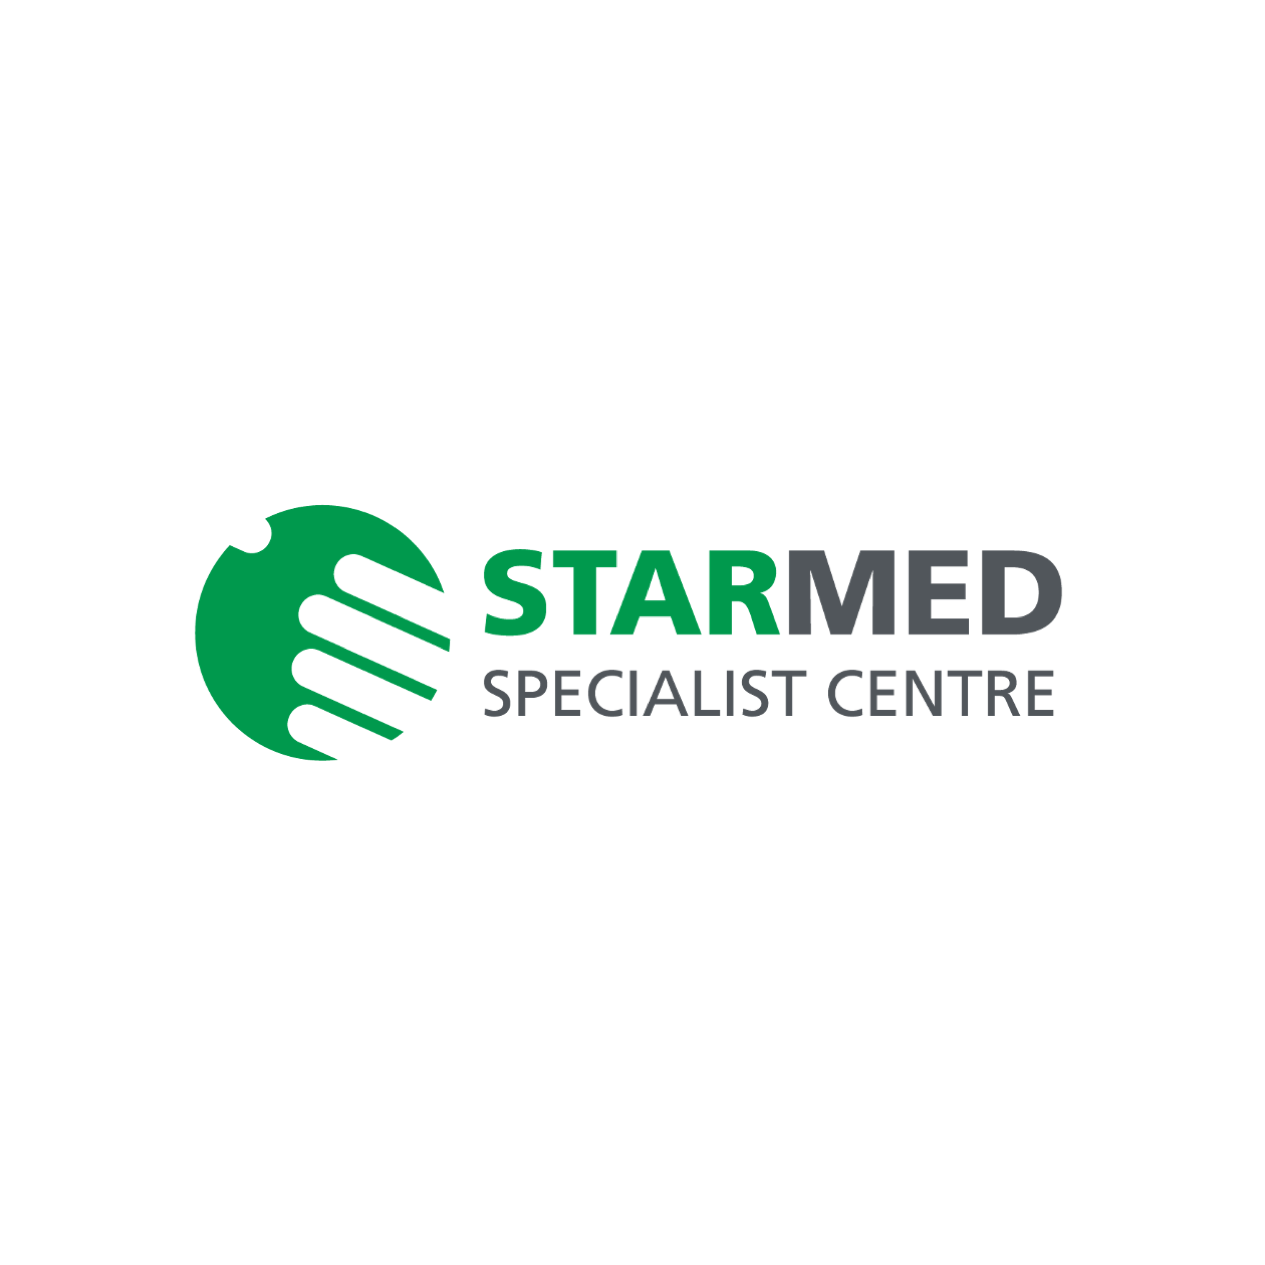 StarMed Specialist Centre, Singapore